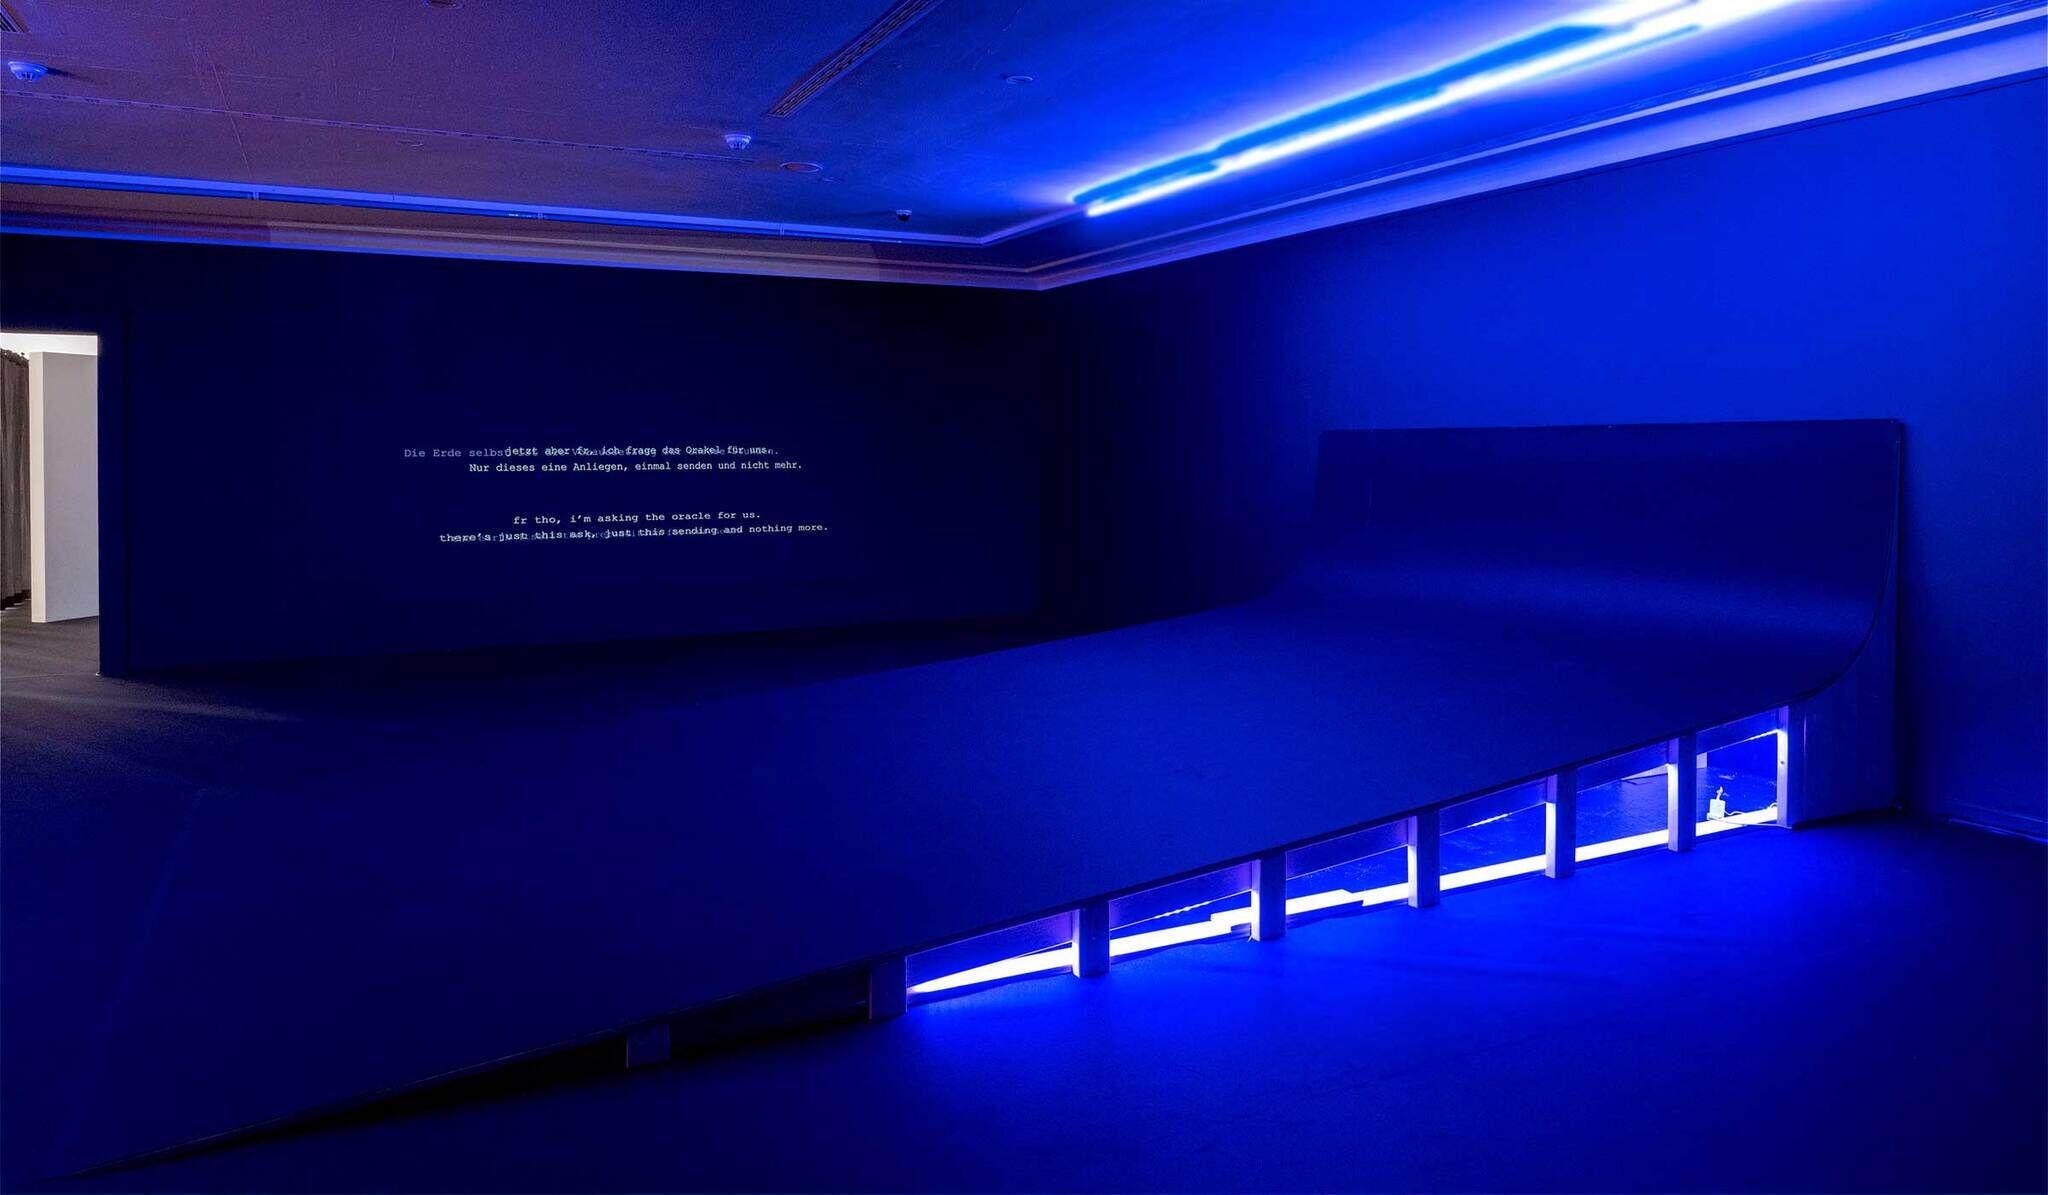 A large ramp structure curls up the back wall of a dimly lit room washed with deep indigo hues. The smooth incline's open undersides glow in iridescent violet. Spread across the adjacent wall, two lines of projected text read: "fr tho, i'm asking the oracle for us. there's just this ask, just this sending and nothing more." with subtitled translation lines above.